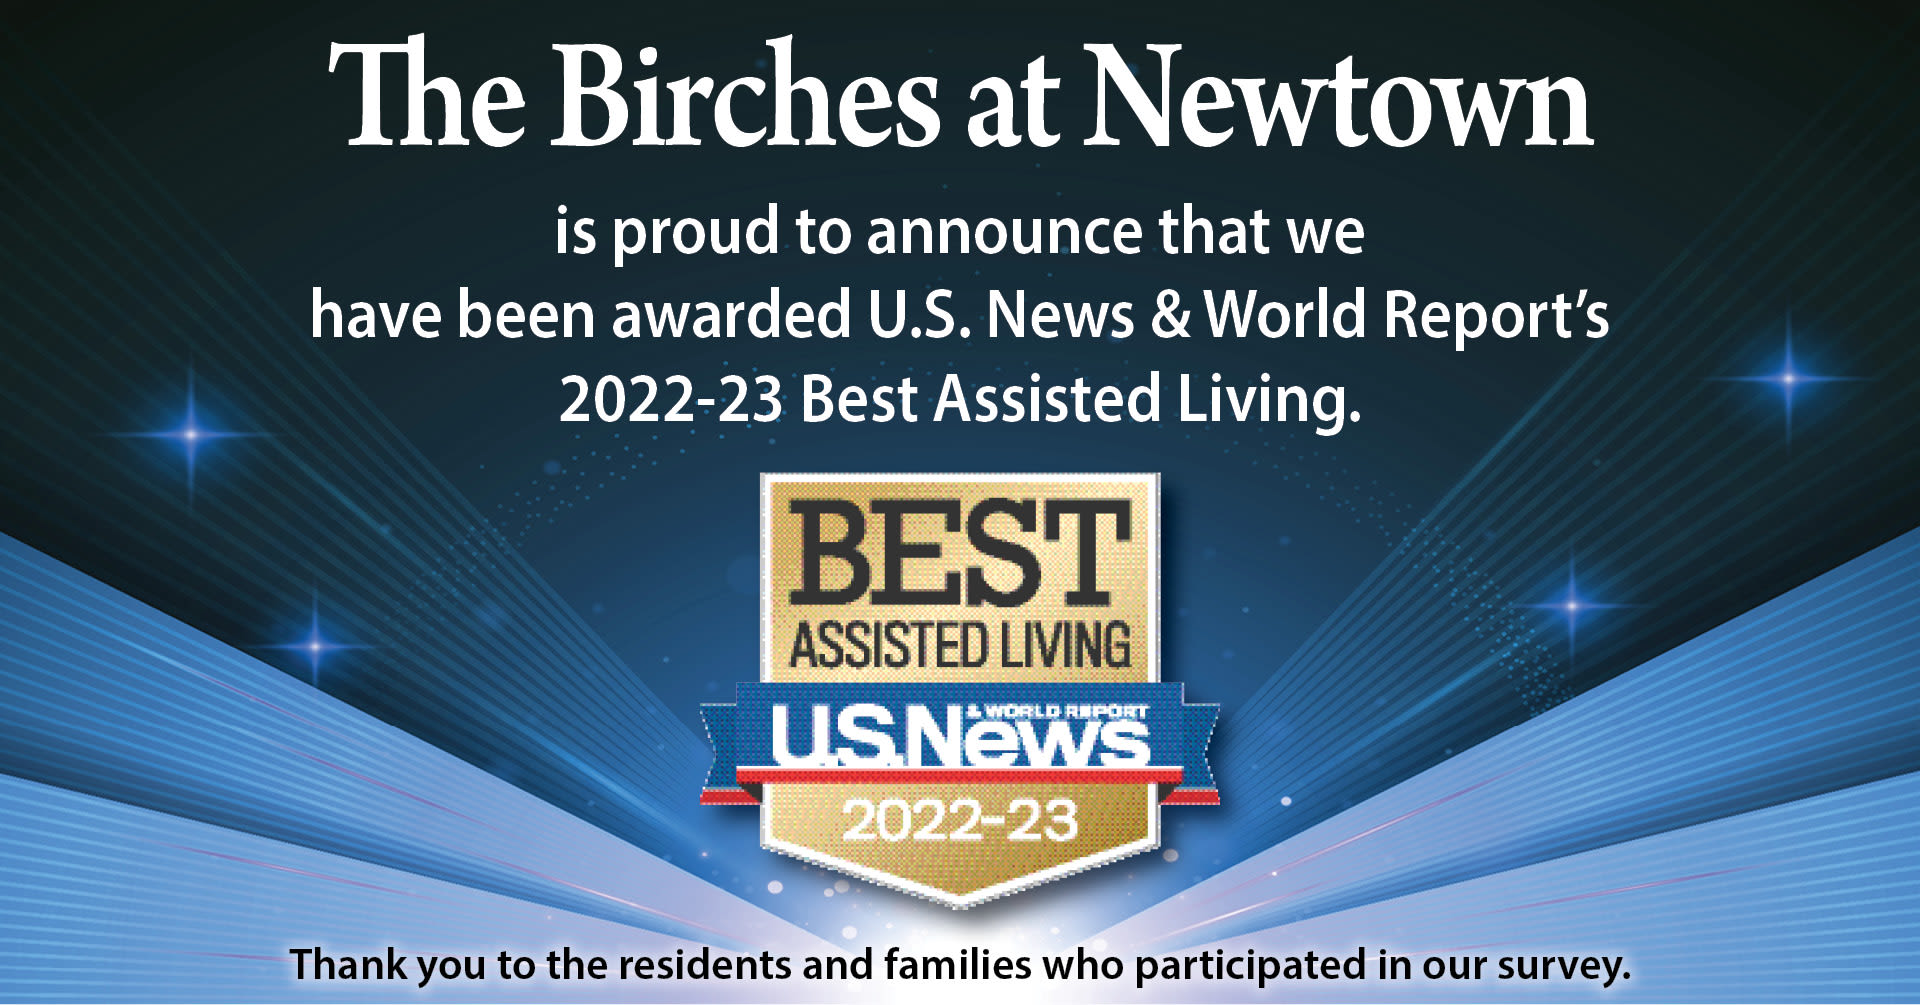 US News Best Senior Living Award 2022 for The Birches at Newtown